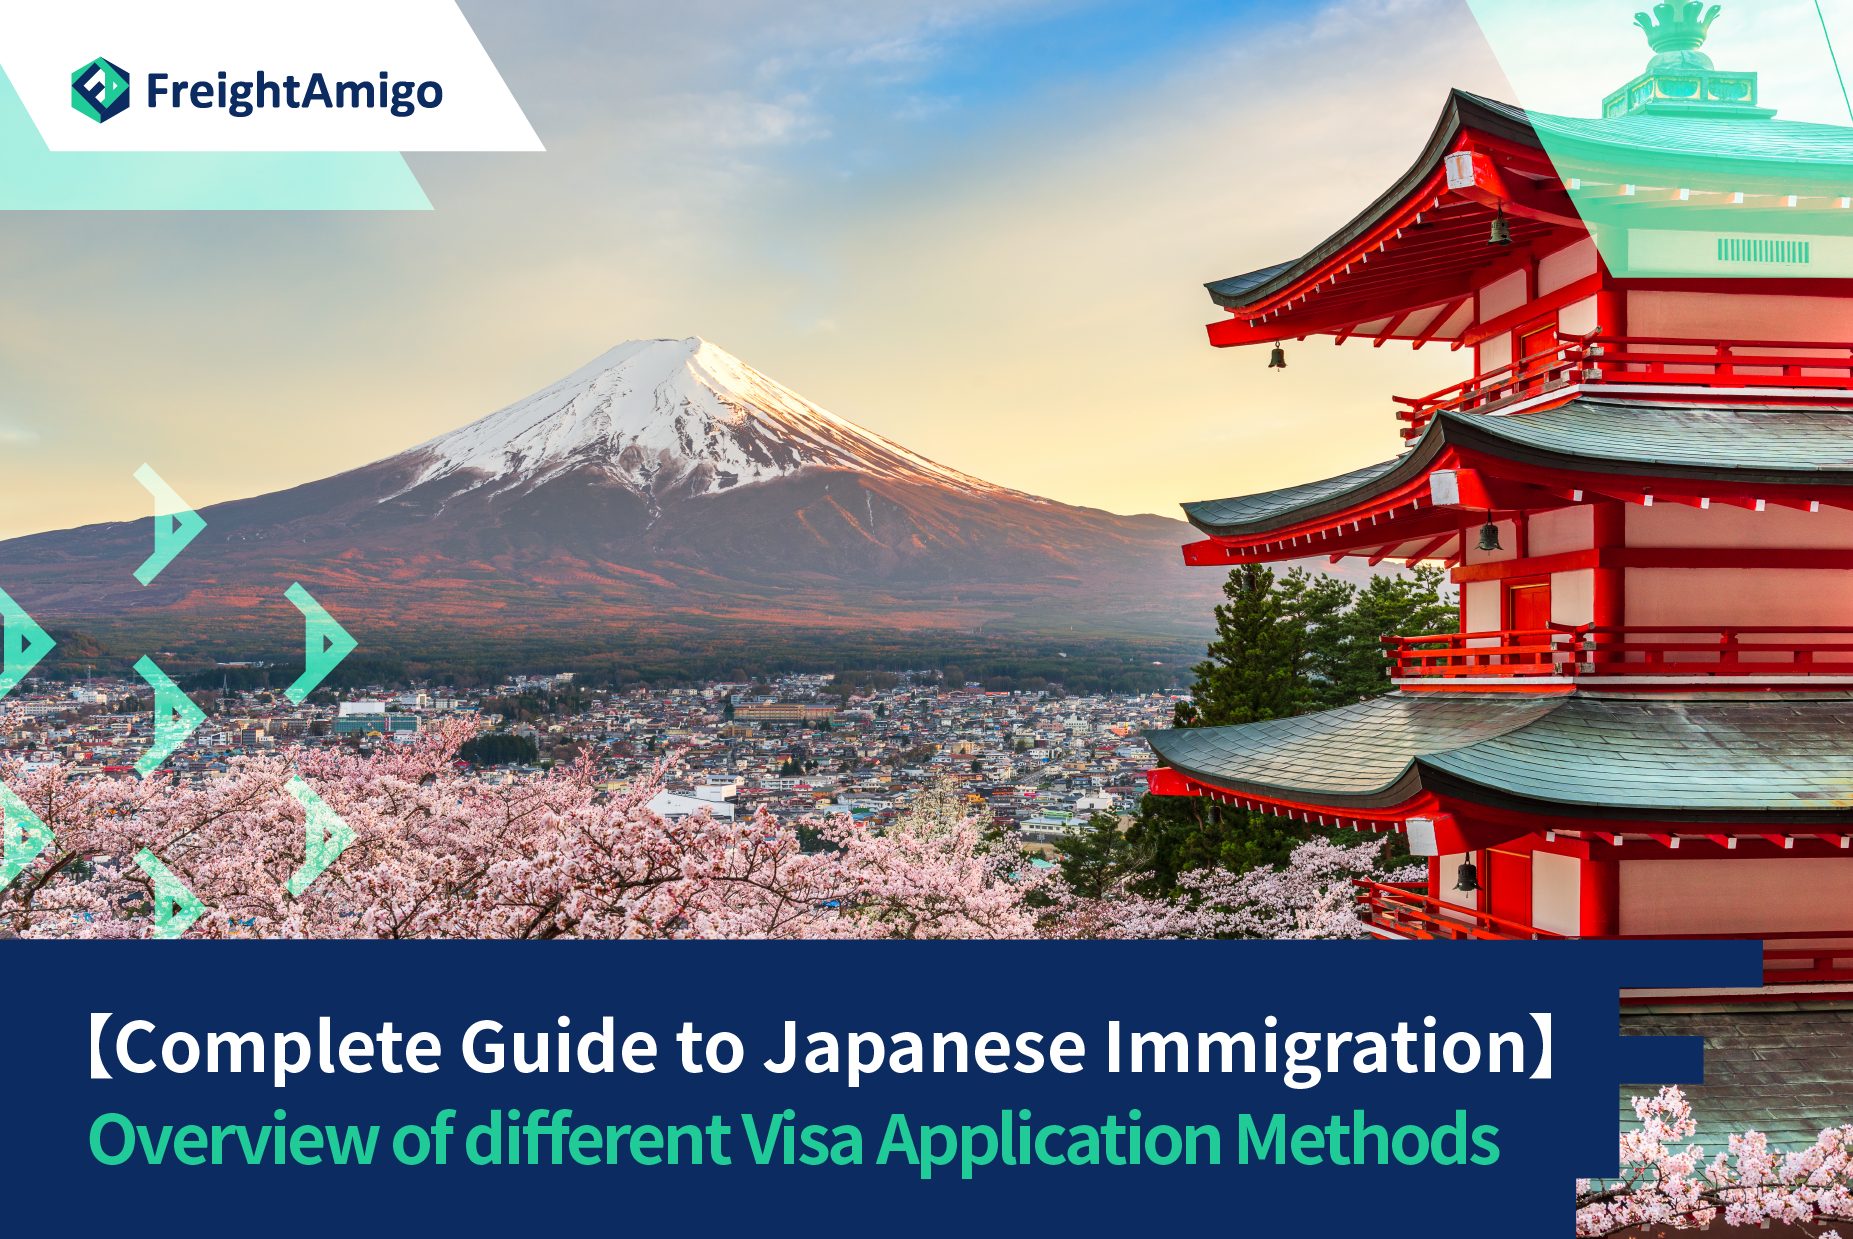 【Complete Guide to Japanese Immigration】Overview of different Visa Application Methods